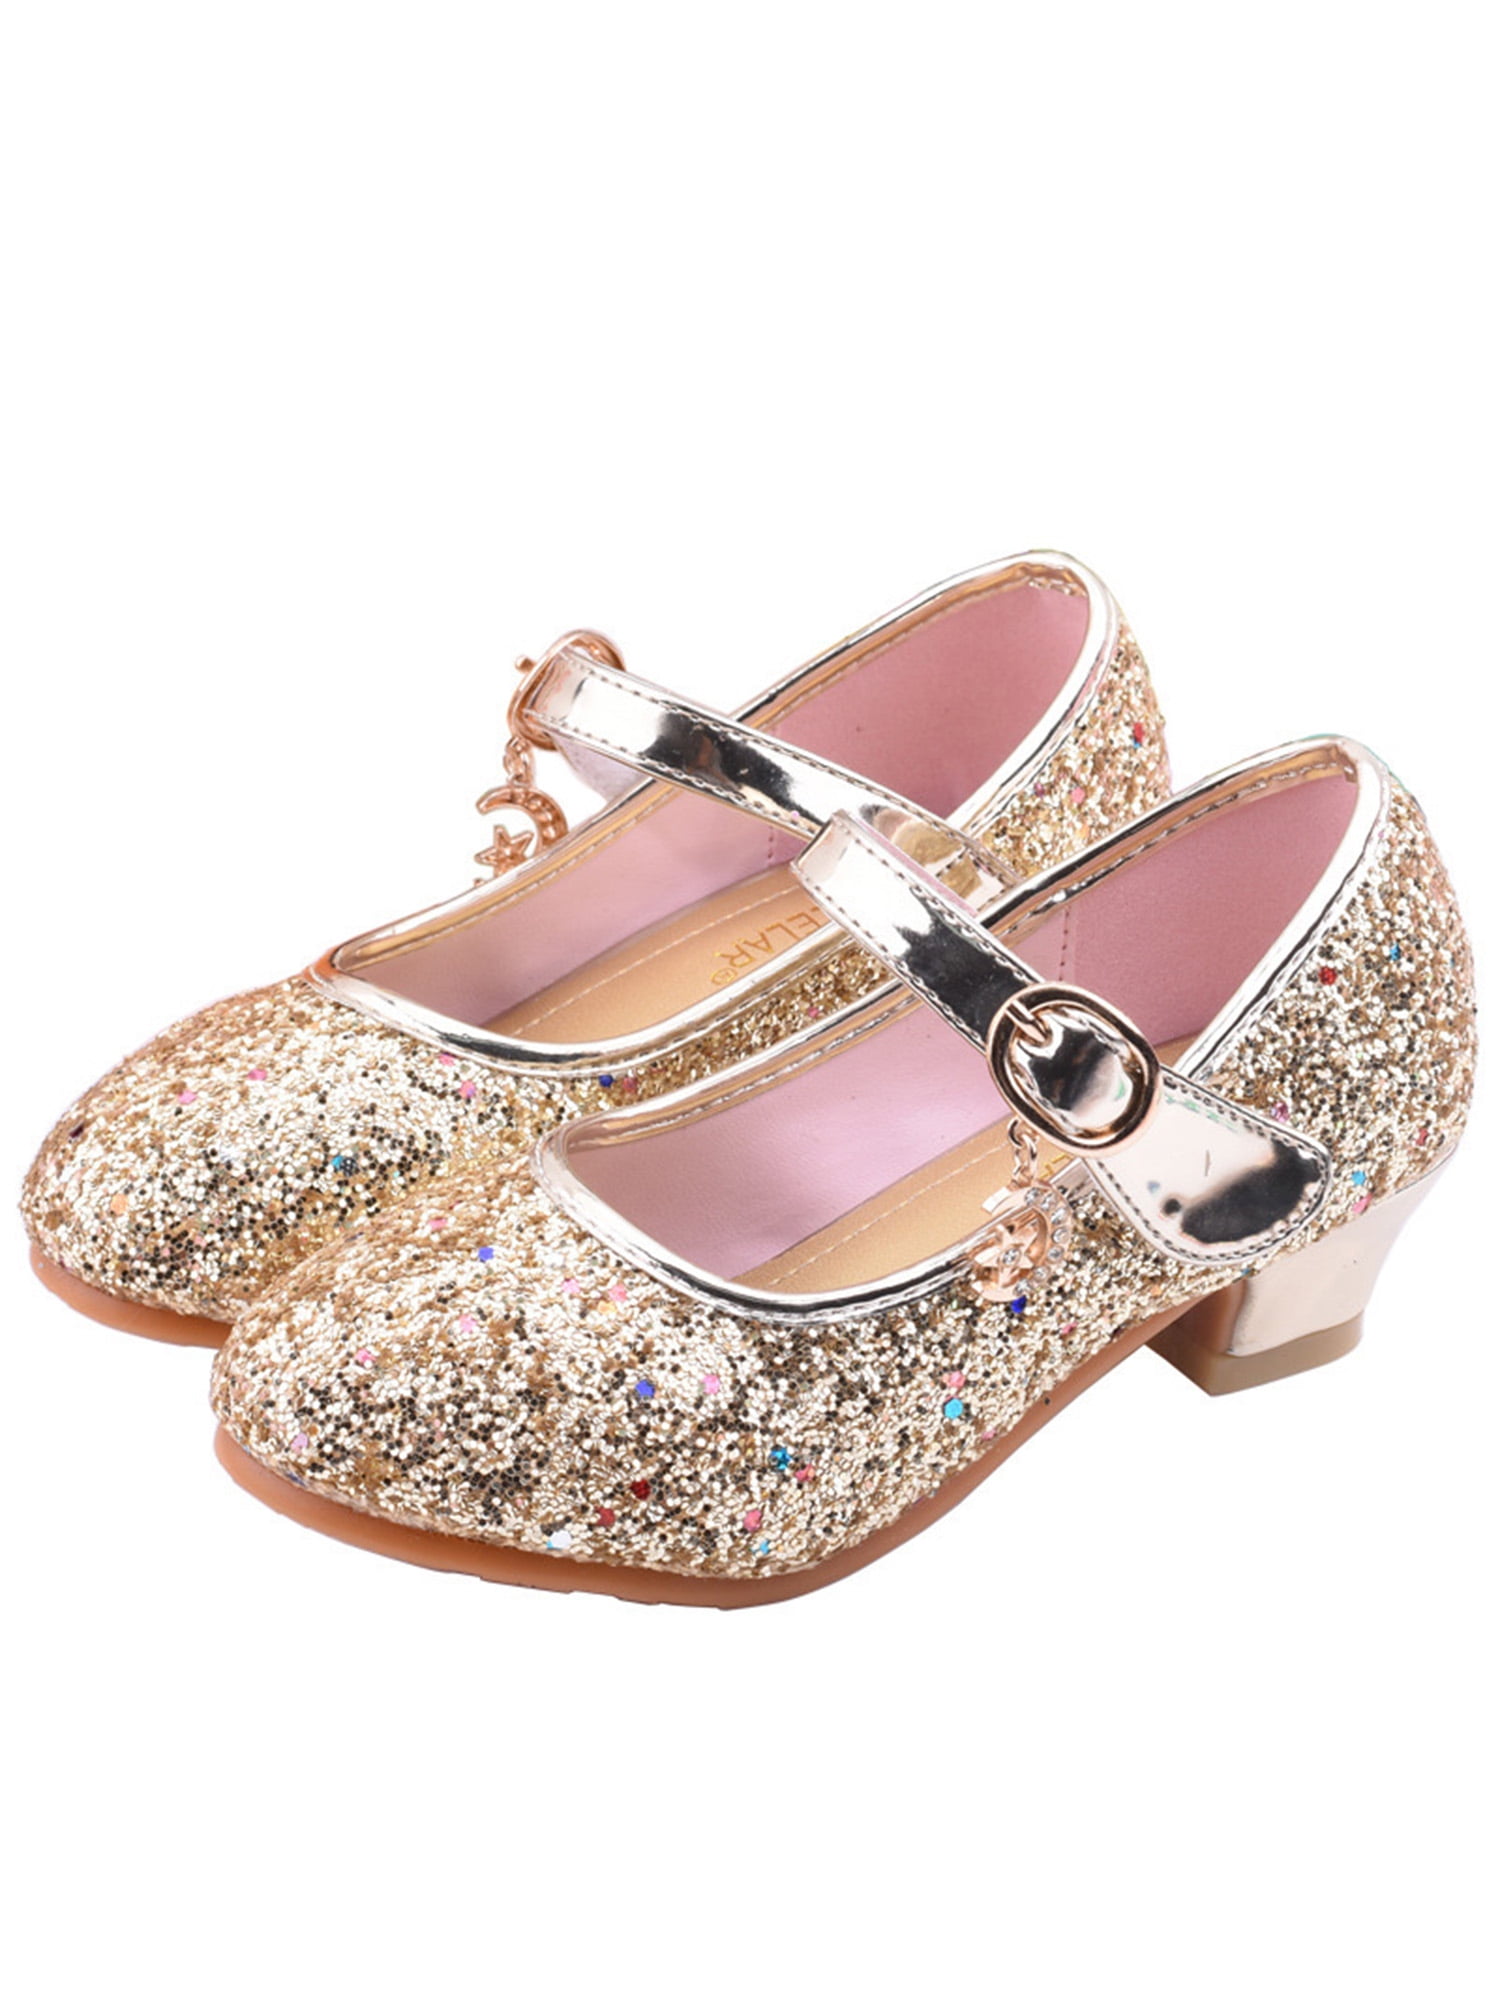 Baby Girls flower girl  Shoes Ballet Flat MaryJane Wedding Shoes Girls Shoes Mary Janes Girl shoes,Green gold glitter shoes 1st birthday  Party Dress Shoes For Girls 